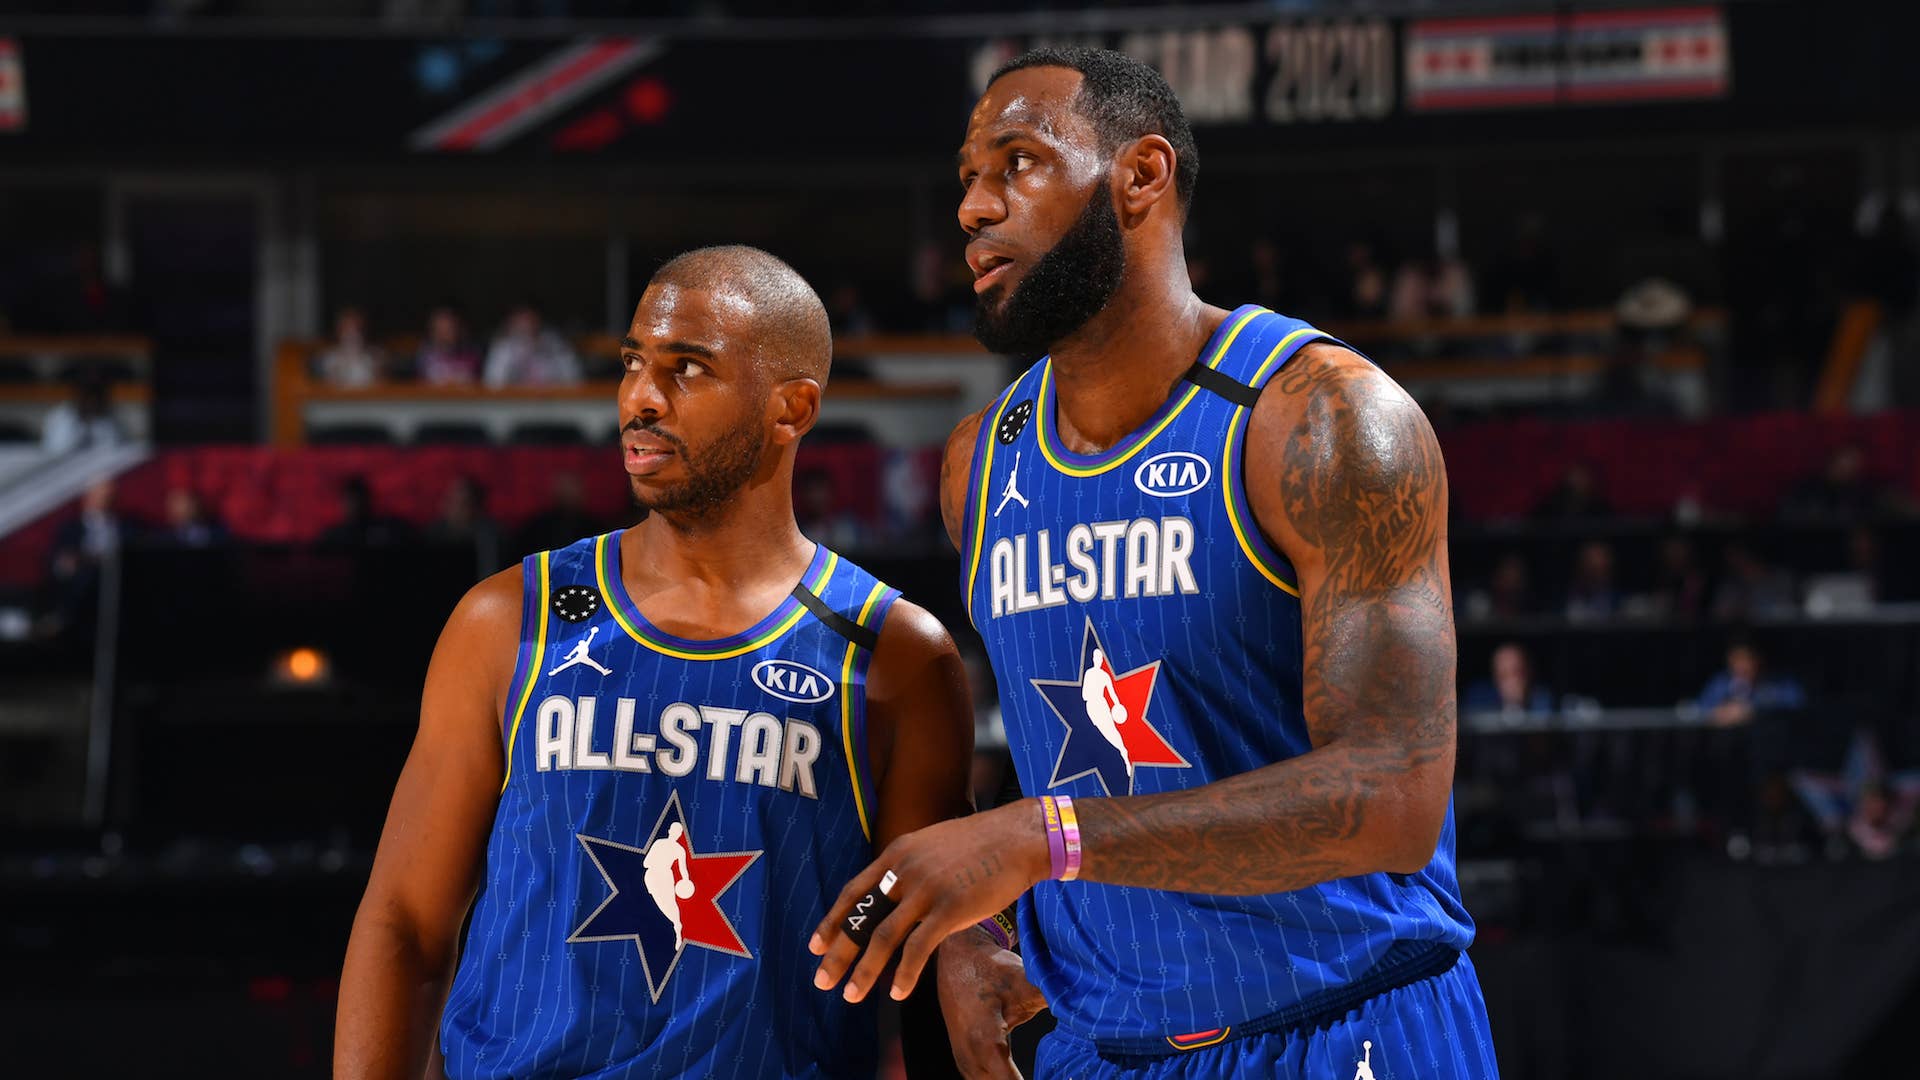 Chris Paul and LeBron James look on during the 69th NBA All Star Game.